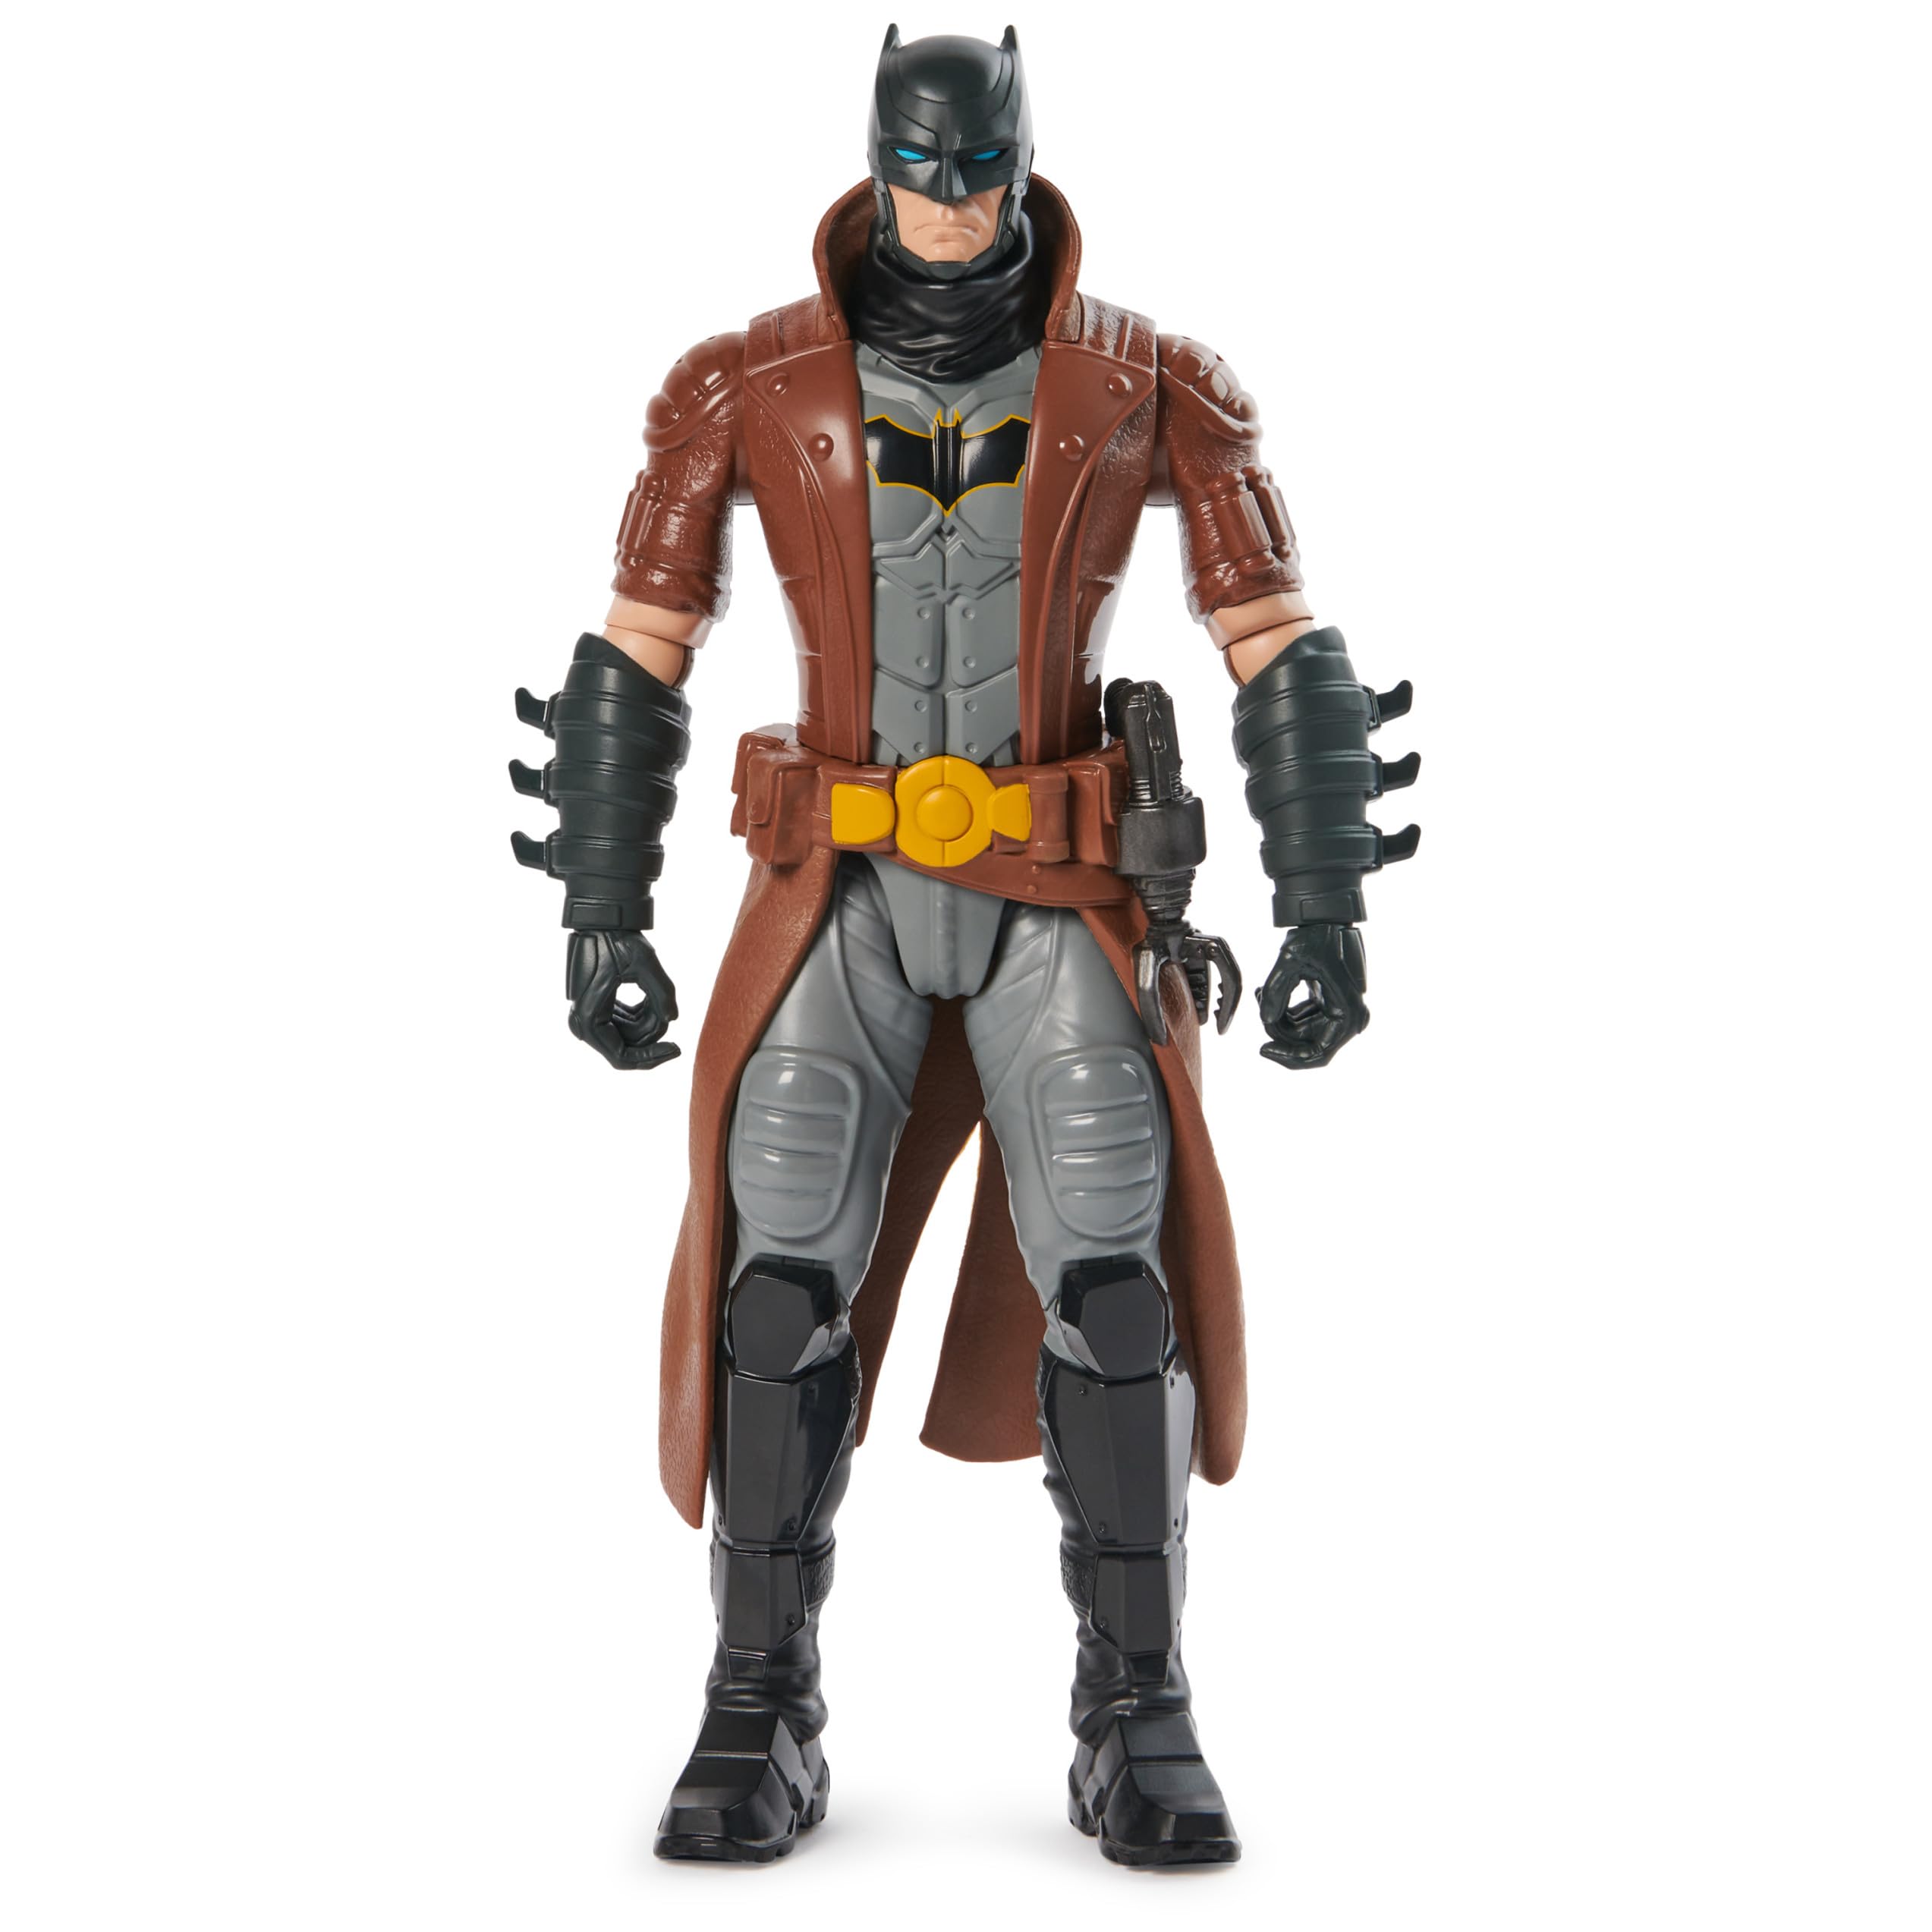 12" DC Comics Batman Action Figure (Brown) $5.73 + Free Shipping w/ Prime or on orders over $35